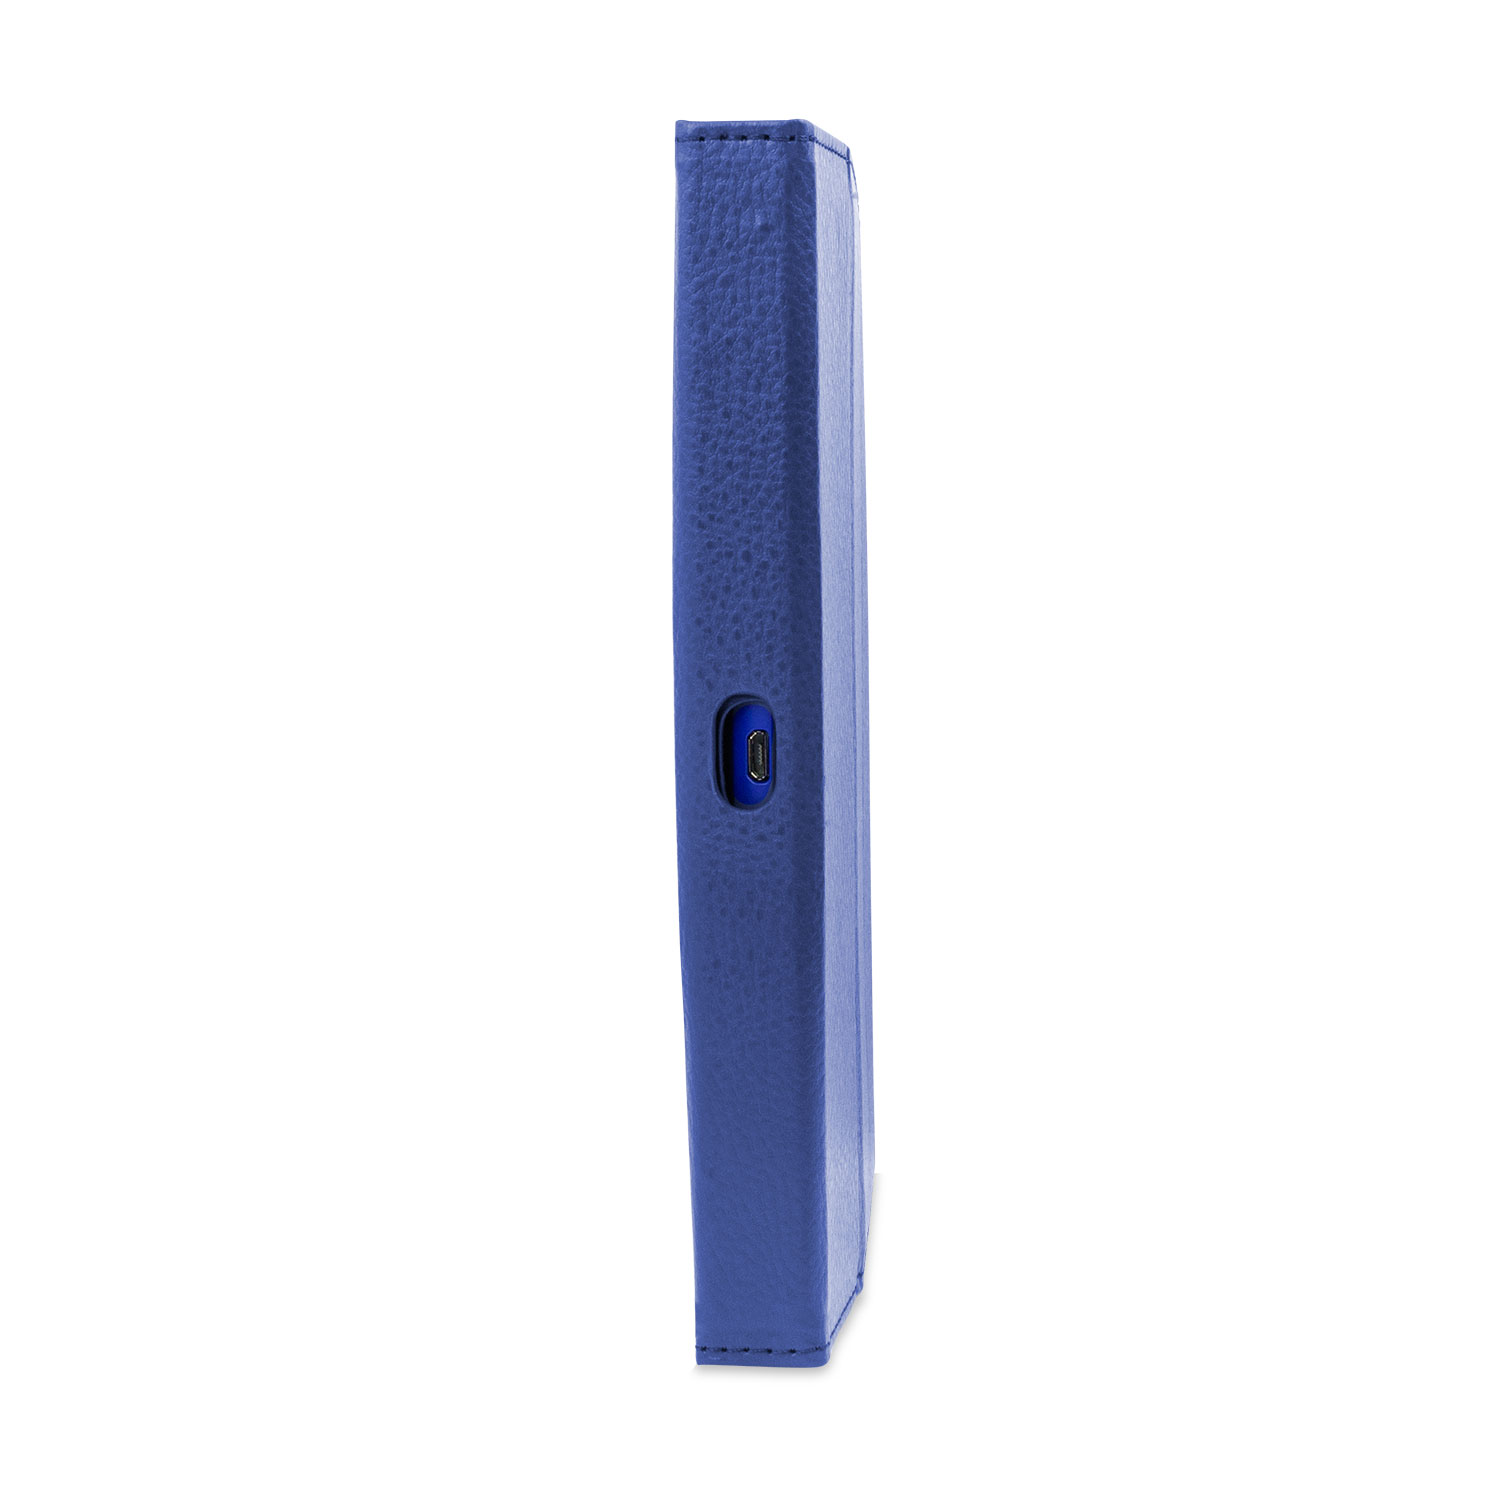 Folio stand leather case with hand grap for Tesco Hudl - Blue